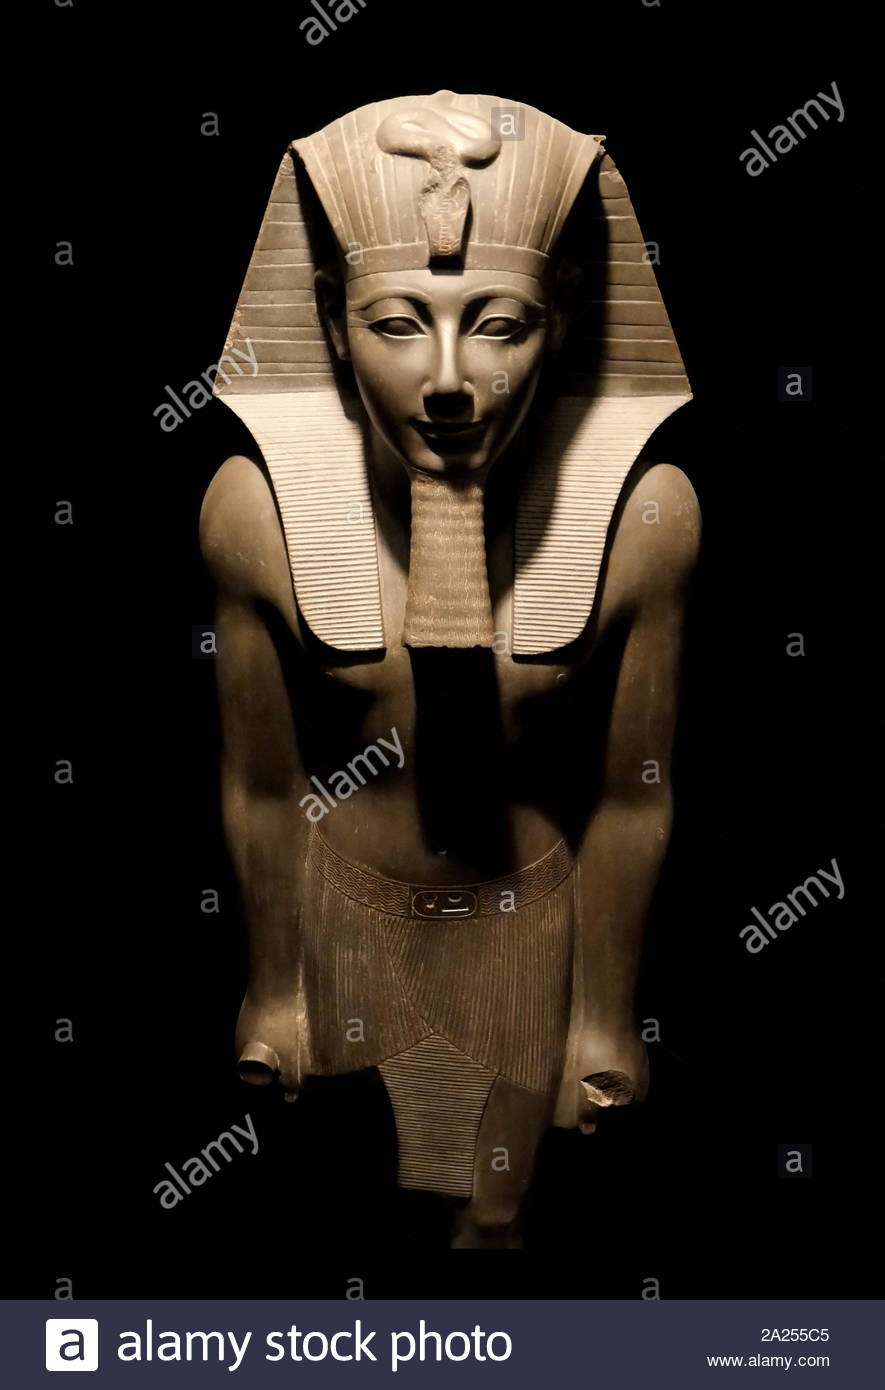 Statue Of King Tutmosis III. Greywacke, New Kingdom, 1490 -1436 B.C. Karnak Temple. He is shown wearing the nemes headdress with the protective uraeus, false beard and an ornate kilt with a buckle inscribed with his cartouche. Stock Photo